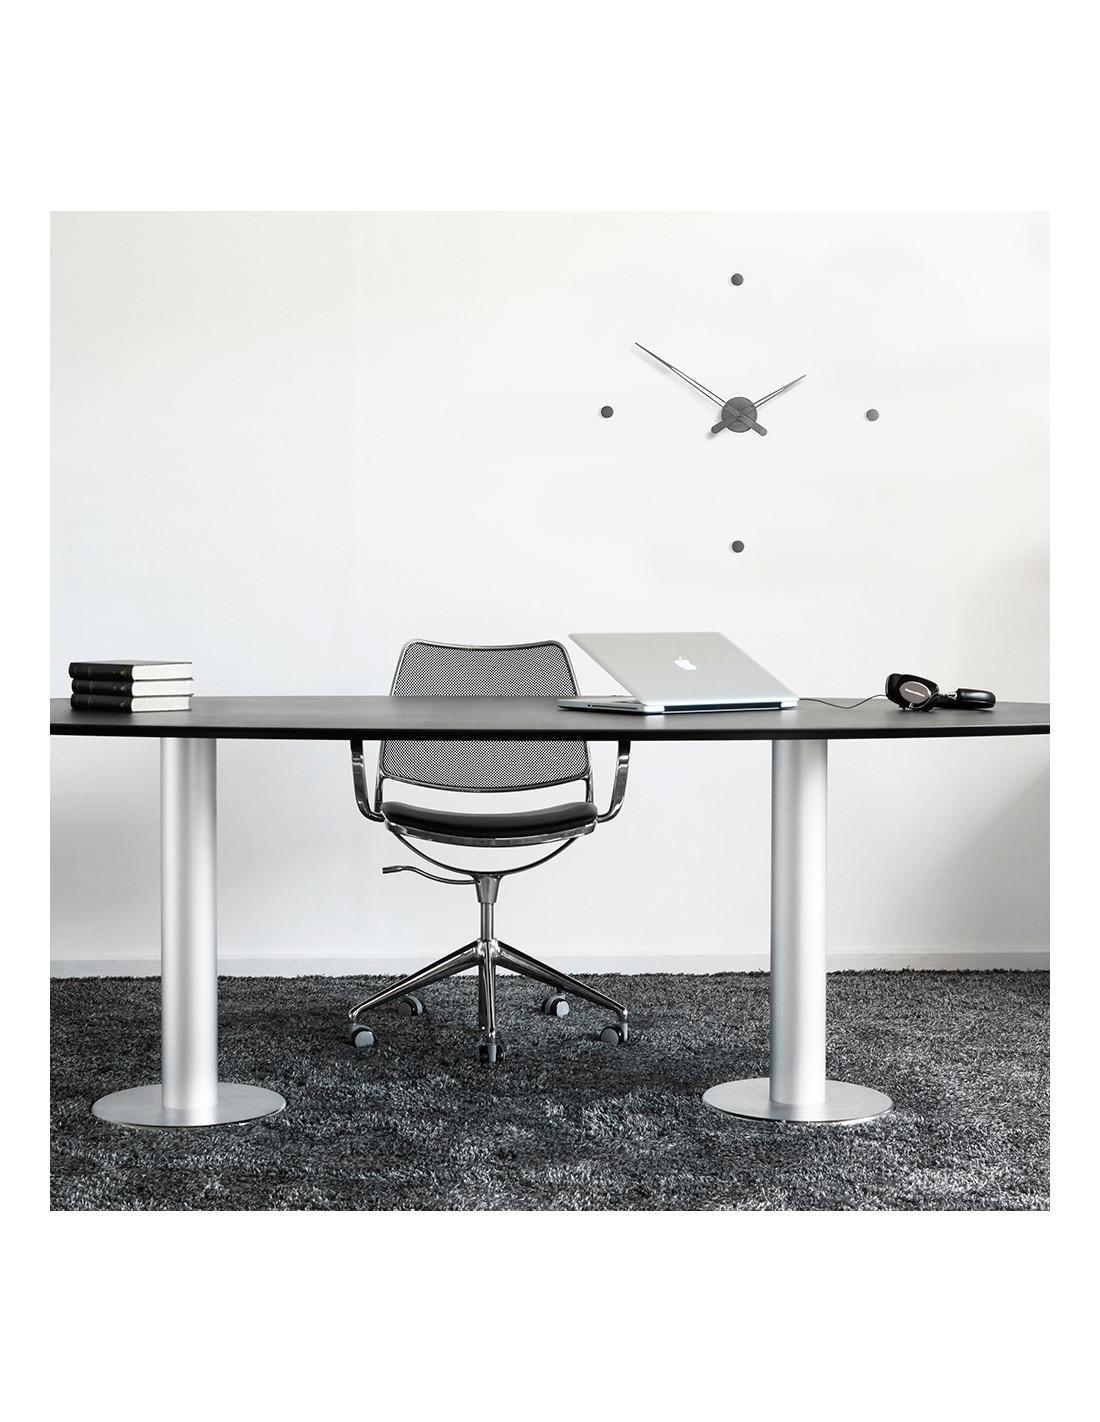 The Rodón 4 T Clock is a wall clock with a serious and discreet aesthetic making it an ideal clock for spaces such as offices or business centers and meetings.
The Rodón 4 T Clock: 4ts and box in graphite finished brass, hands in graphite finished